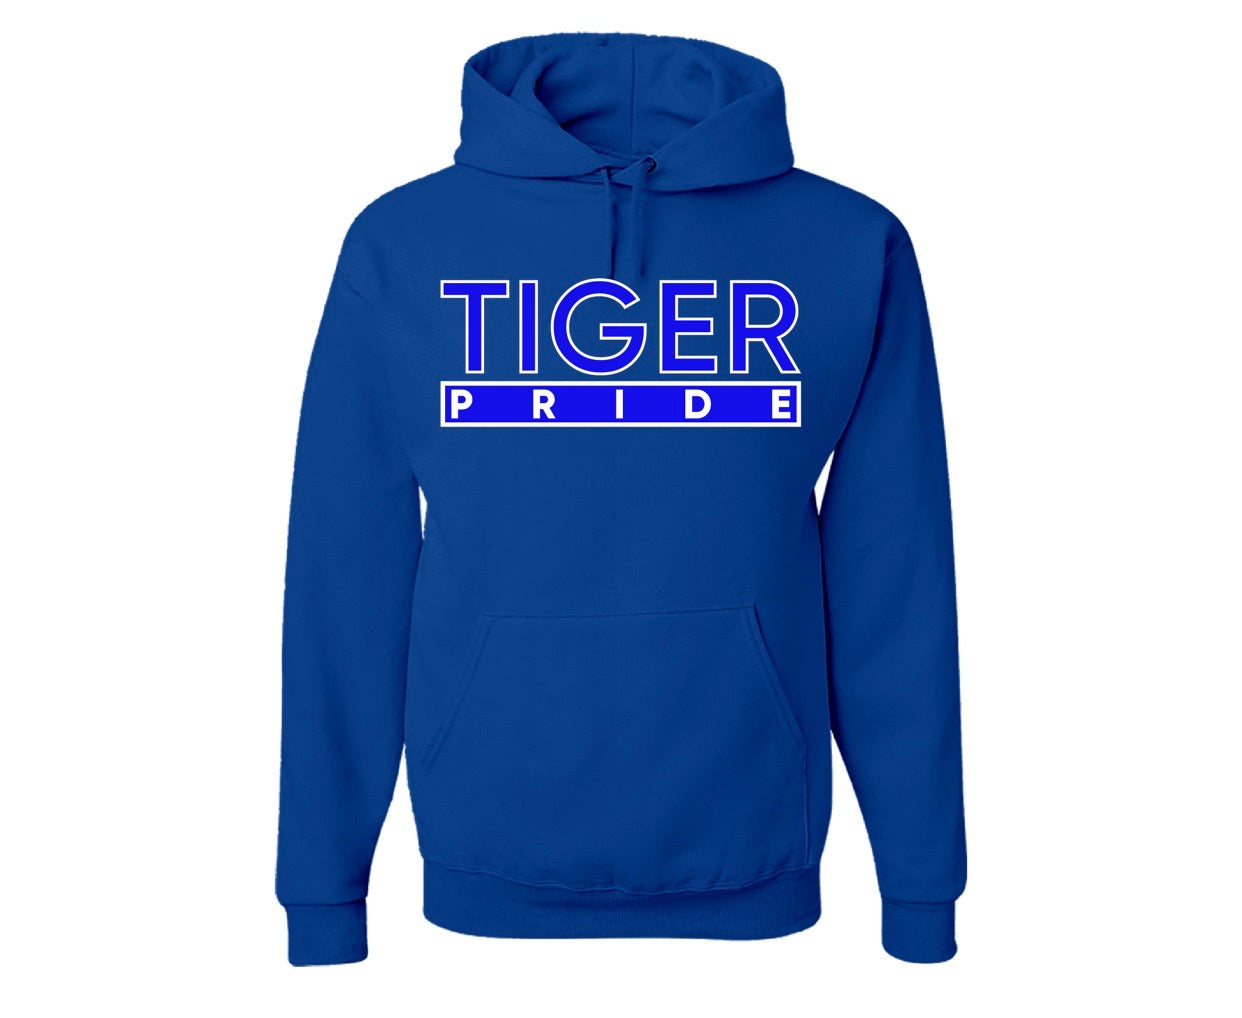 The “Tiger Pride” Hoodie in Royal Blue/White (TN)